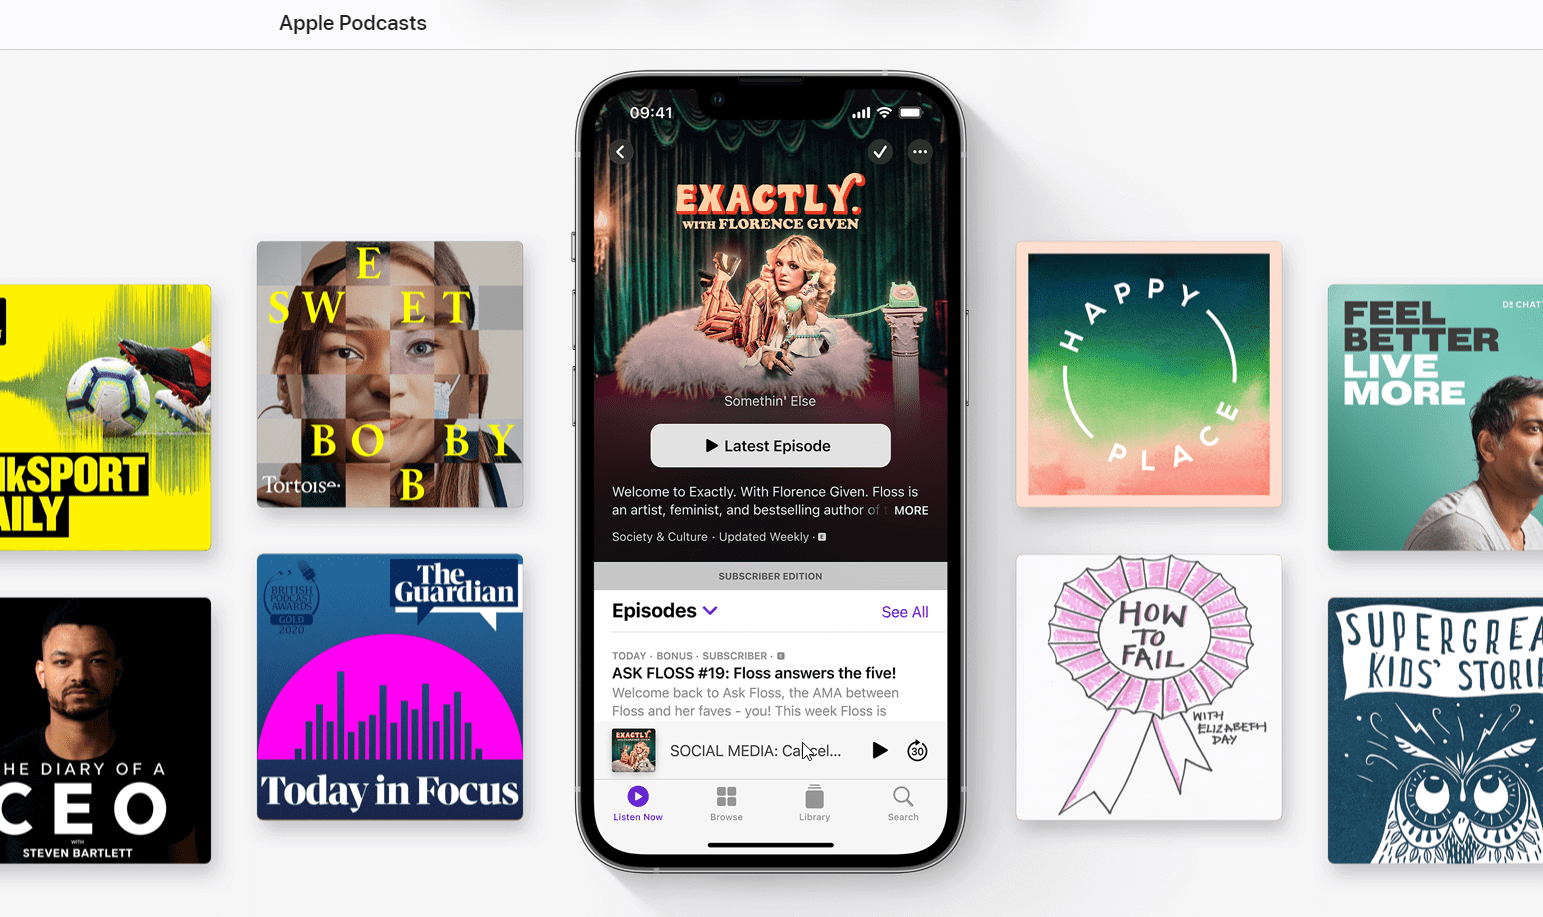 Apple Podcasts homepage showcasing featured podcast